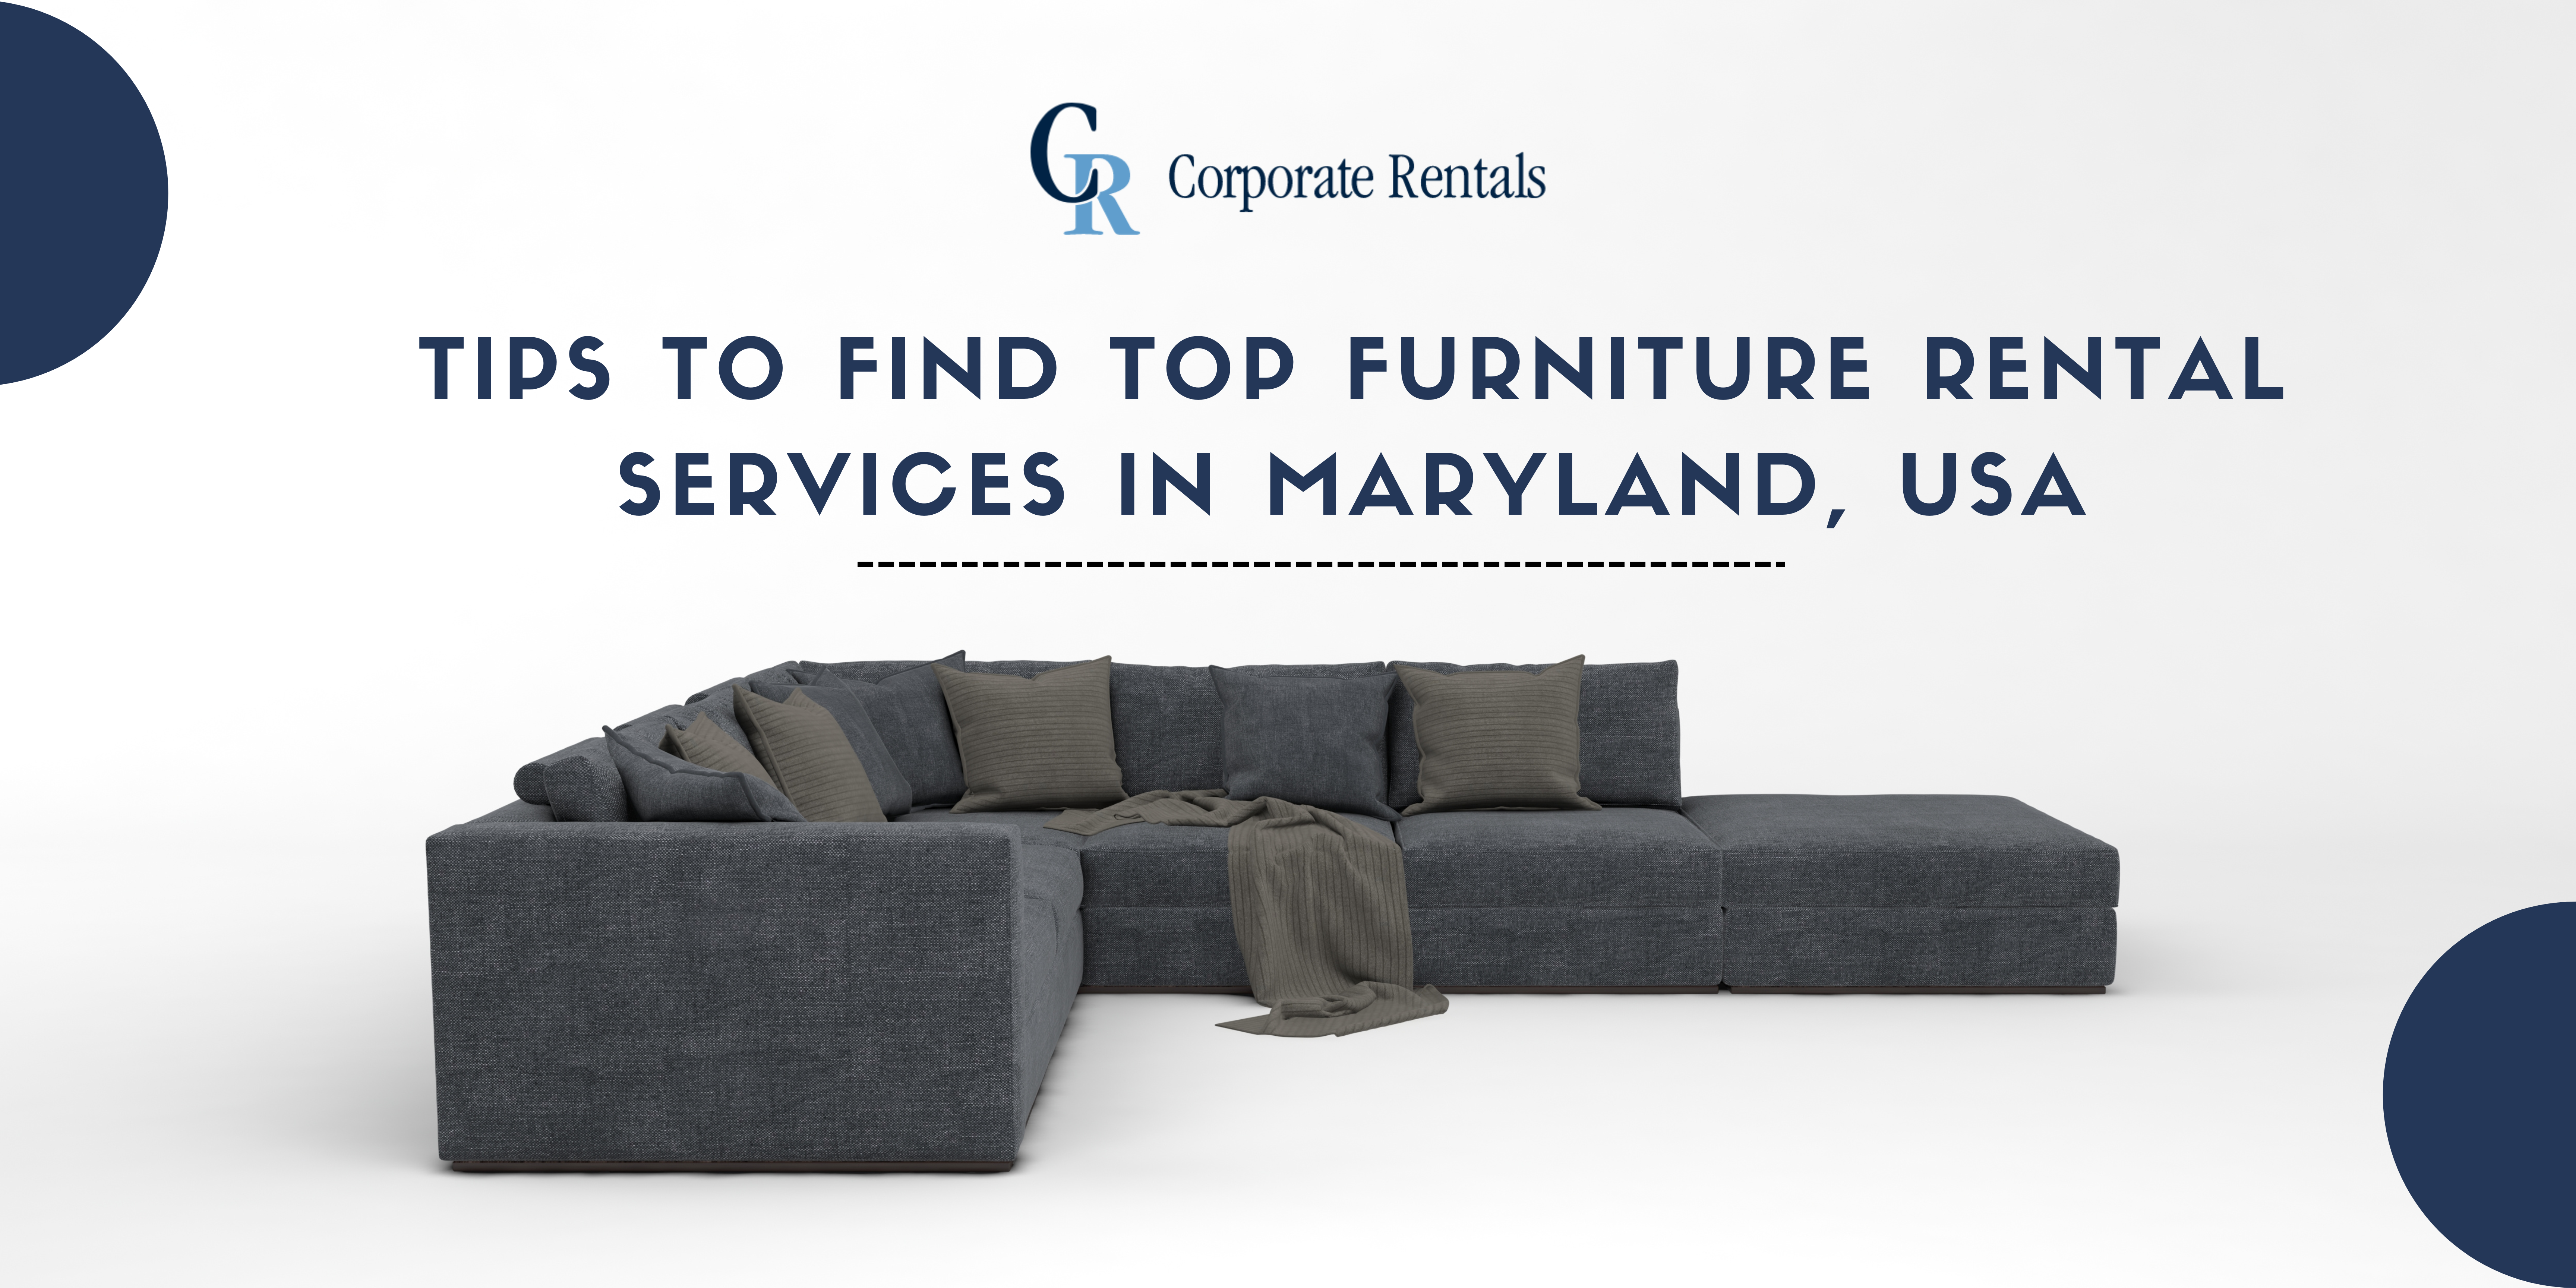 Tips to Find Top Furniture Rental Services in Maryland, USA